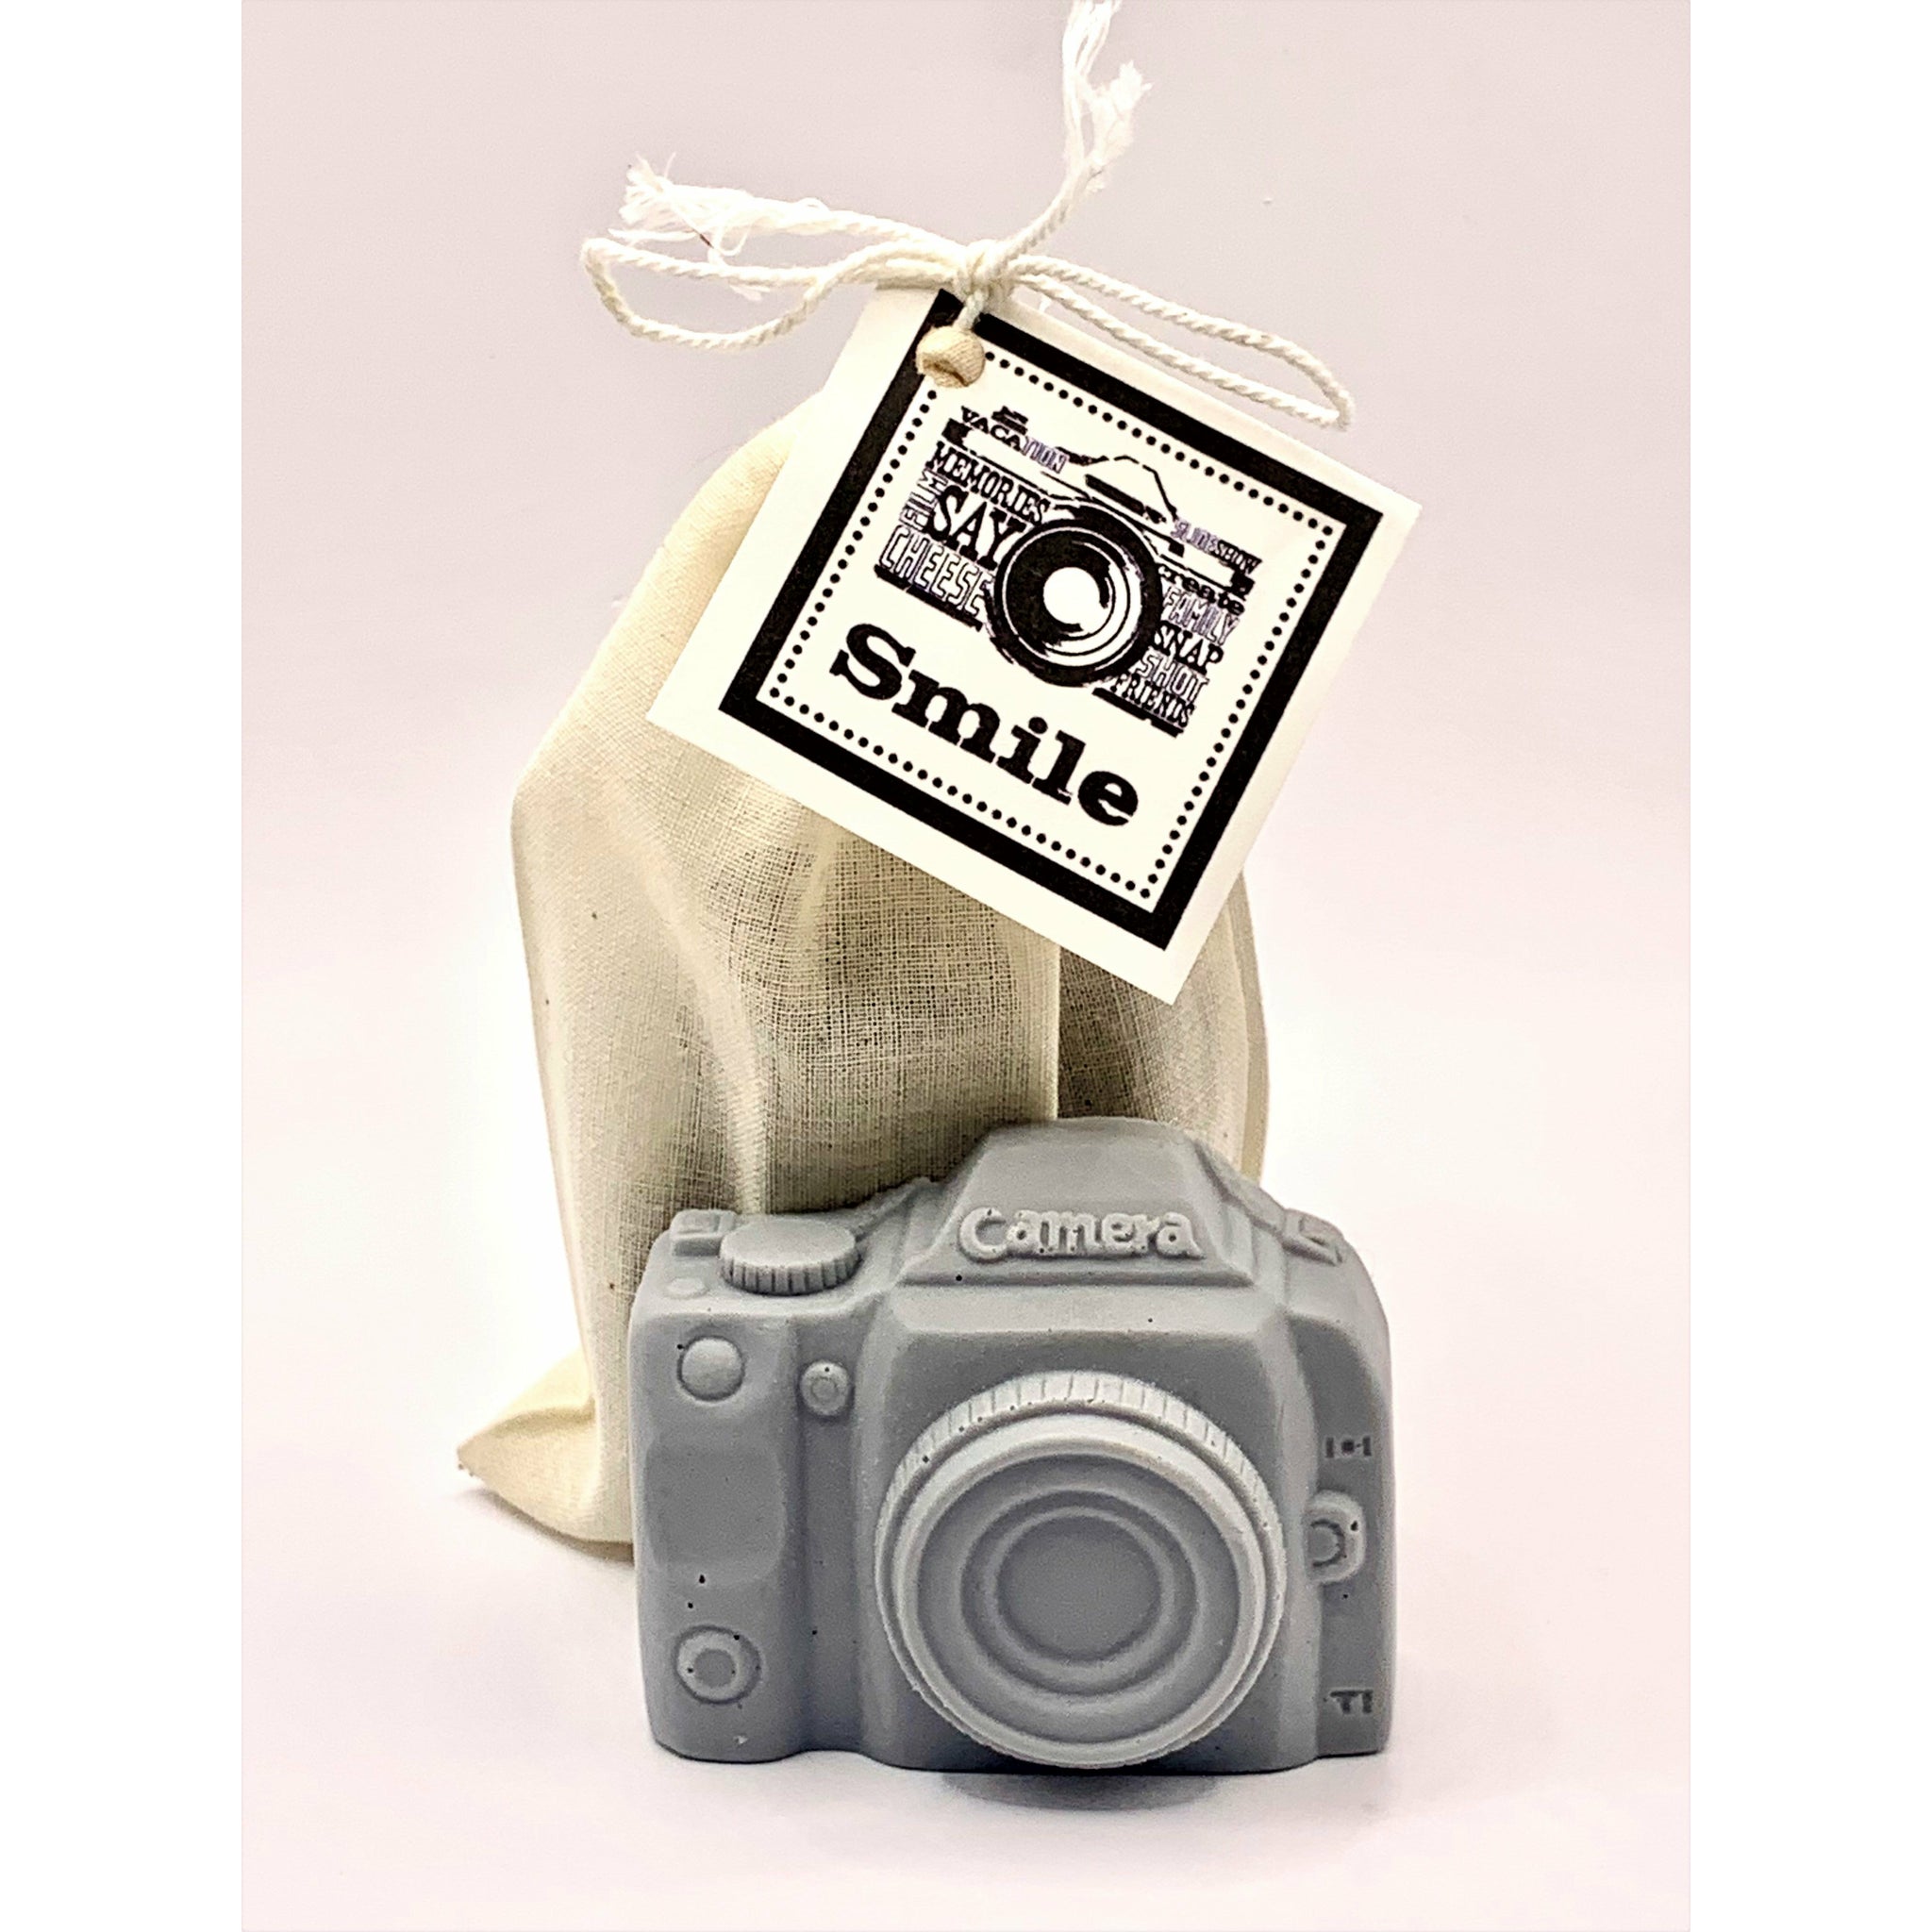 Camera Soap comes with bag and smile tag.  Perfect gift for photographers!